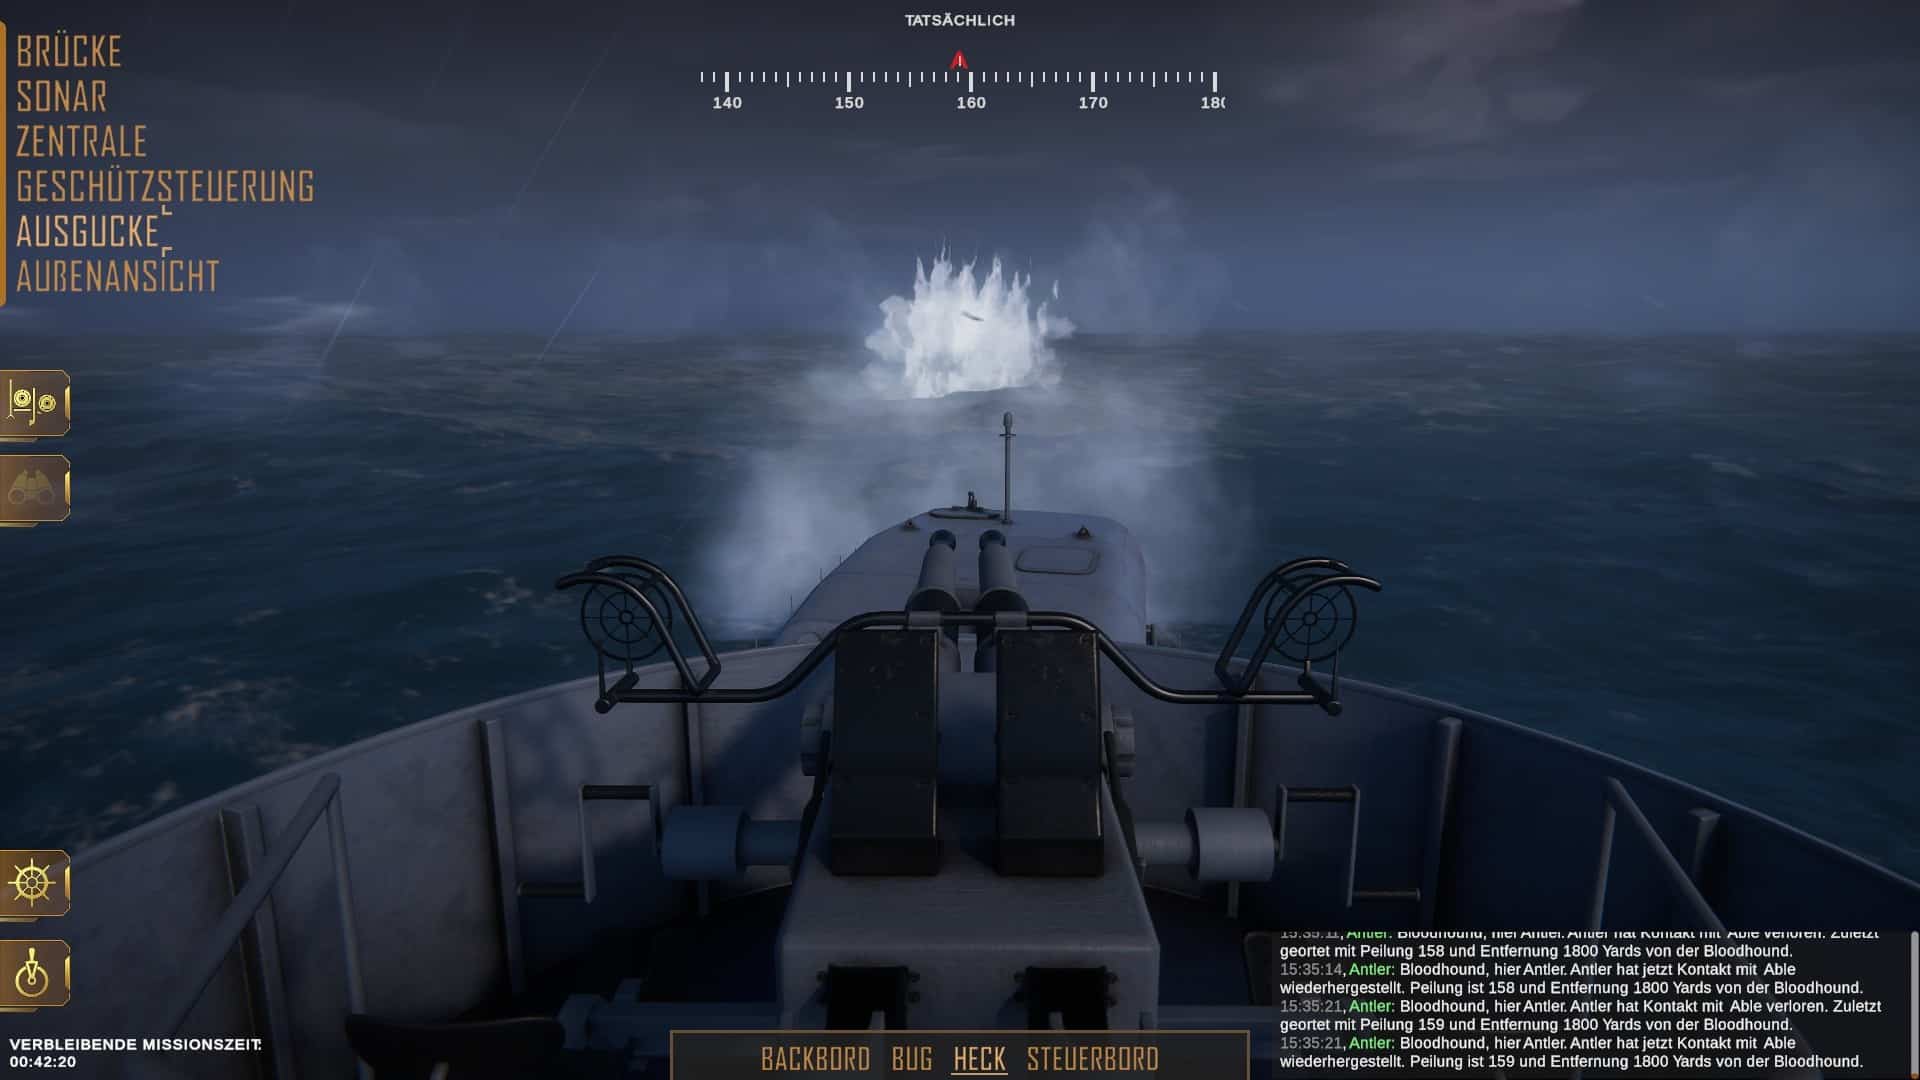 (As long as a U boat is still above water, we can try to destroy it with the on-board gun.)